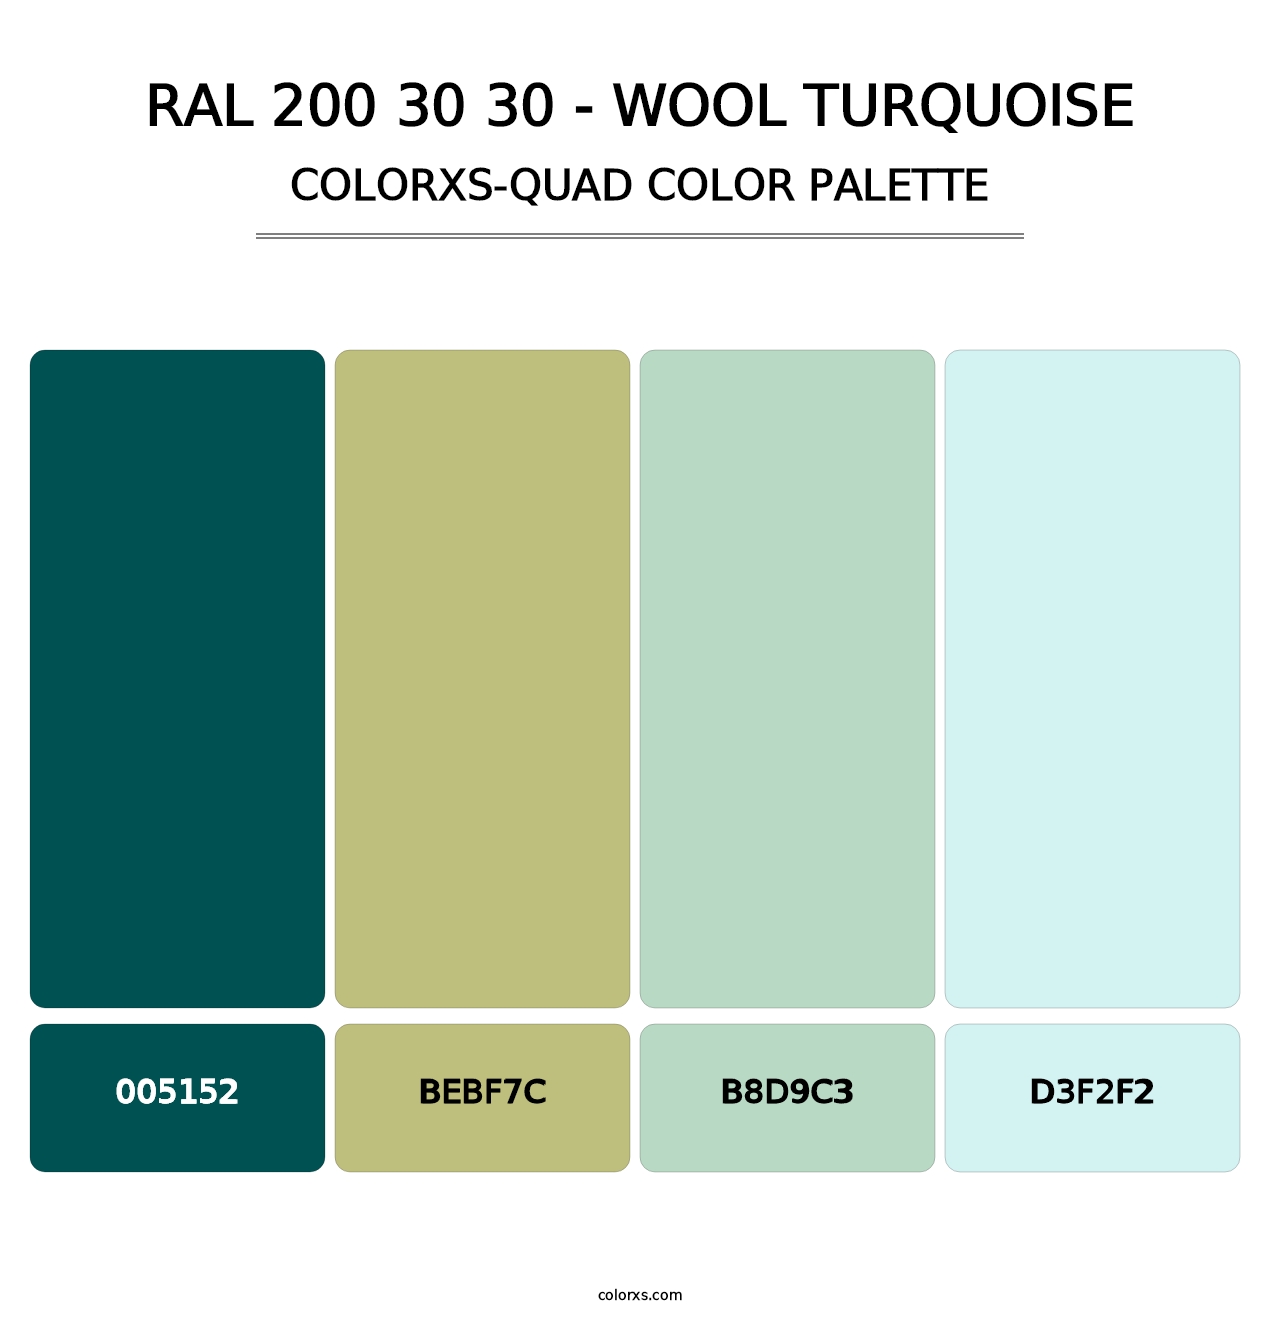 RAL 200 30 30 - Wool Turquoise - Colorxs Quad Palette